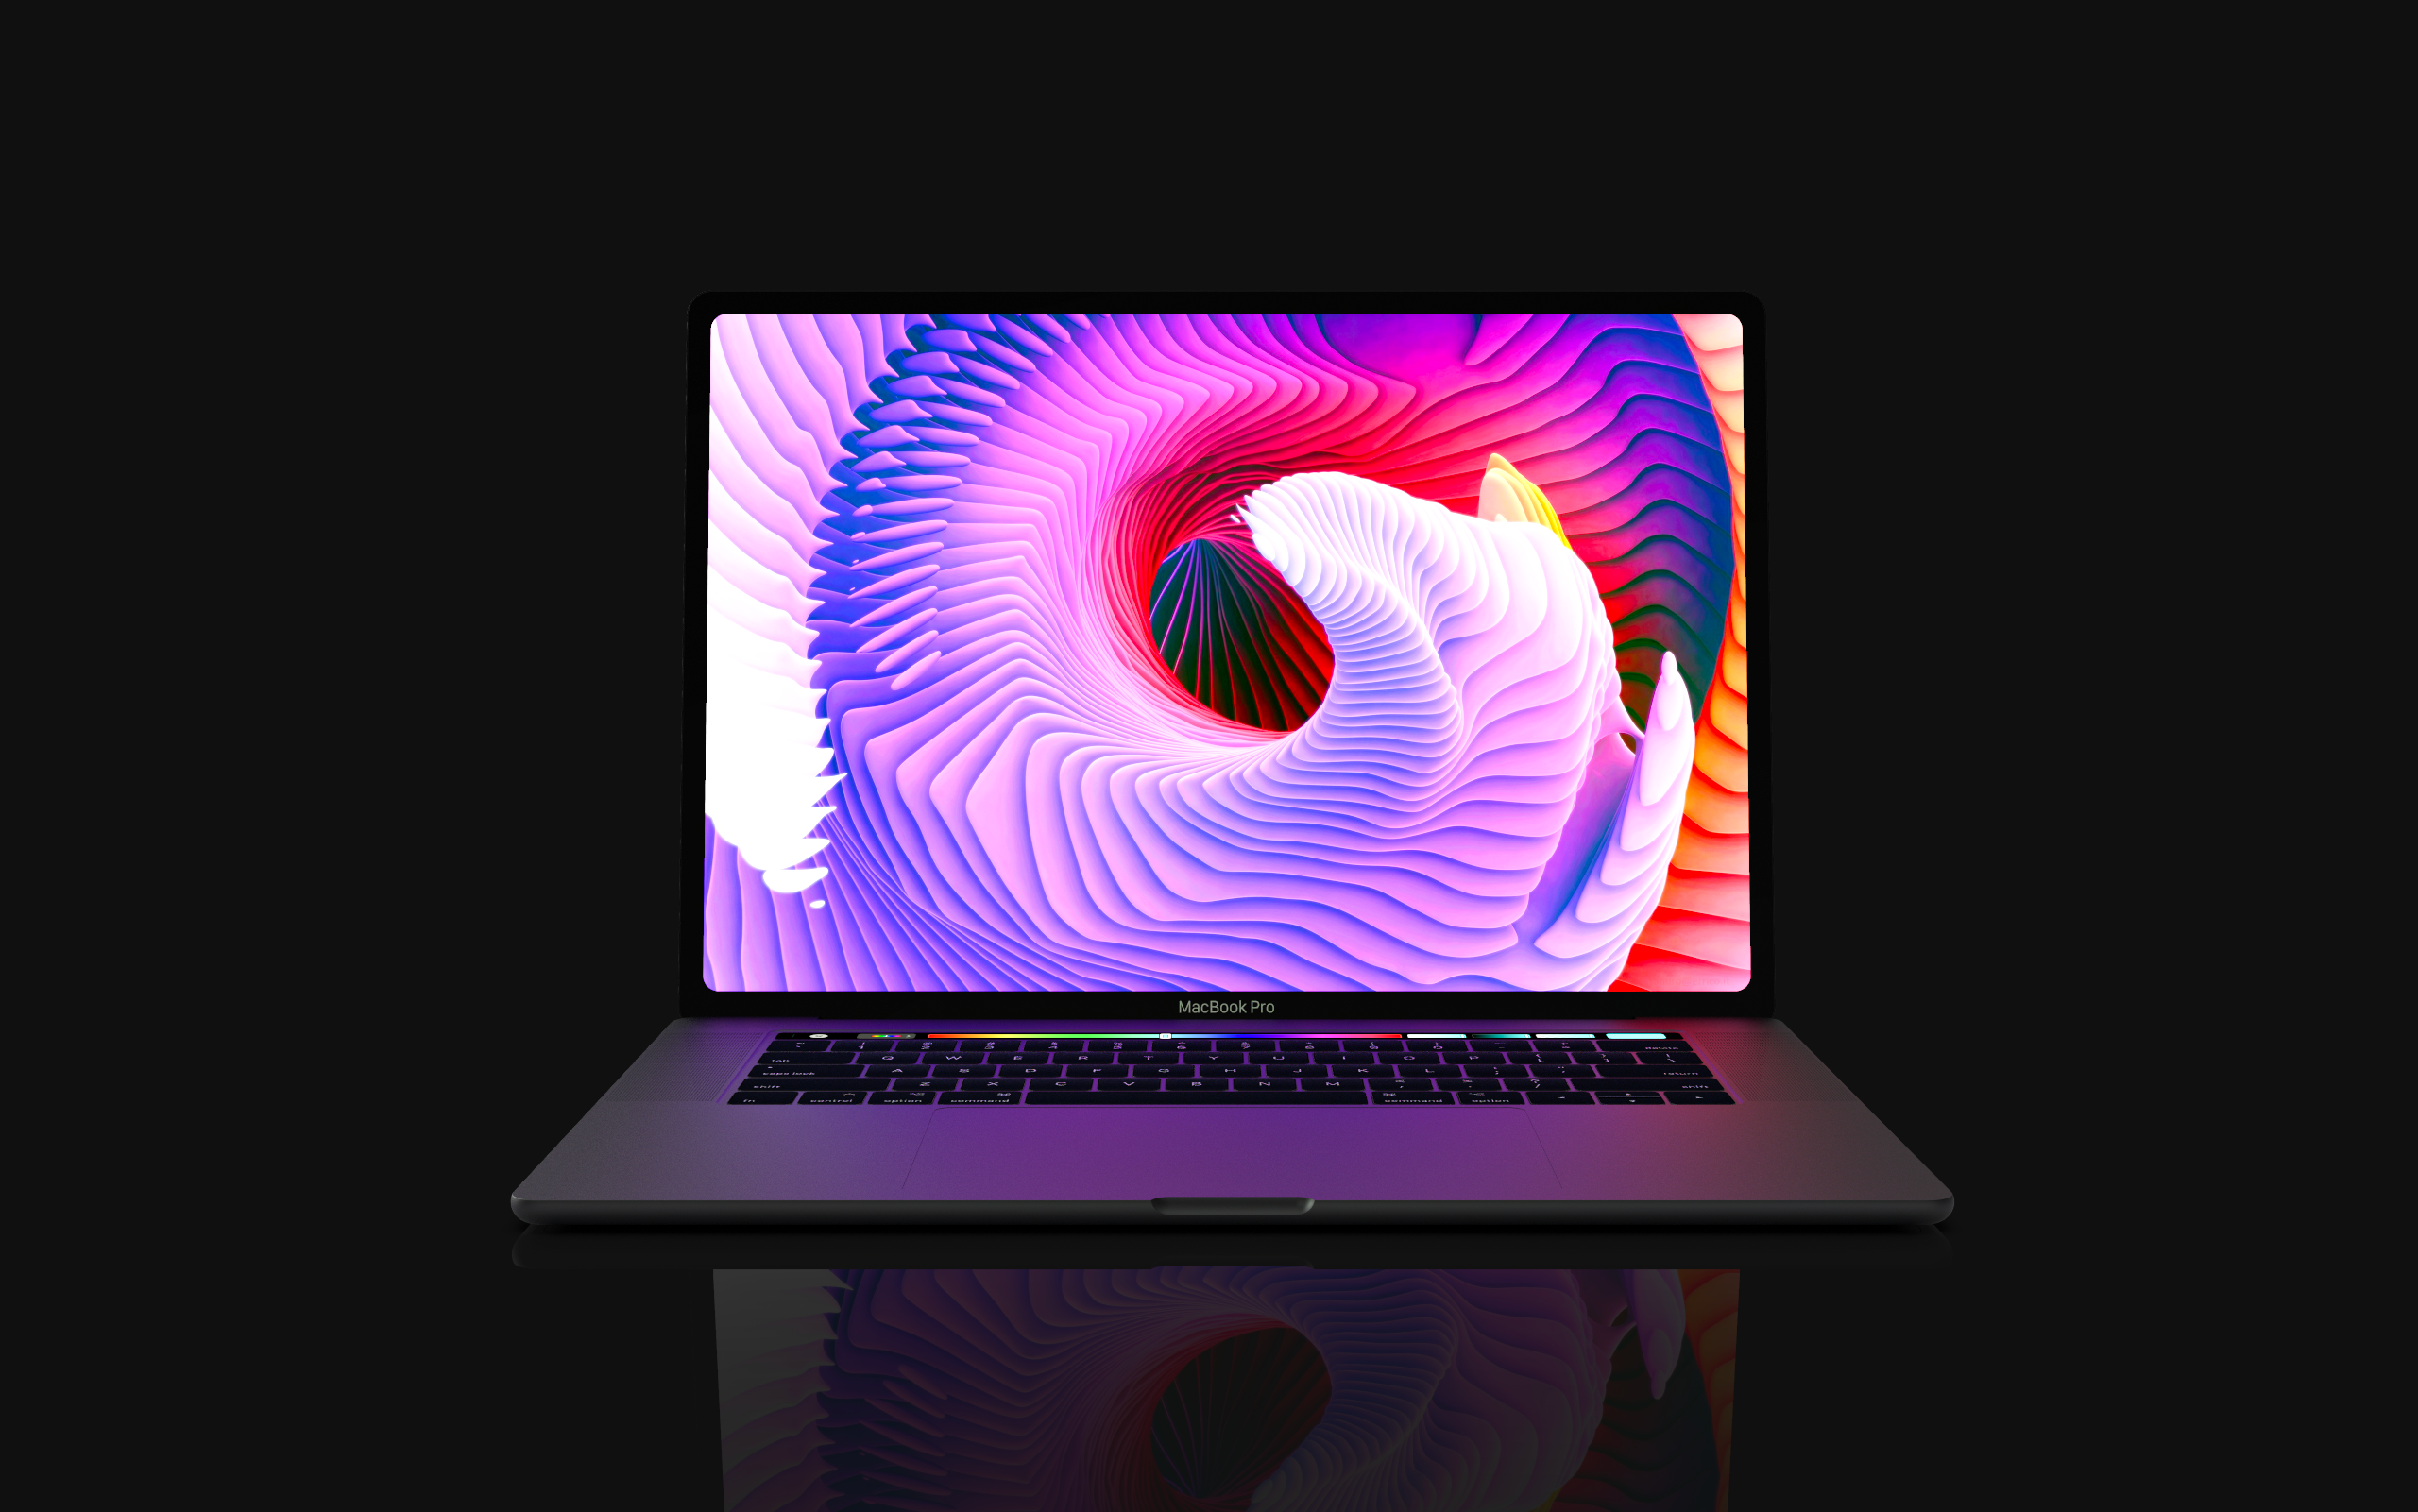 New scissor keyboard would have delayed the launch of the 16 ″ MacBook Pro